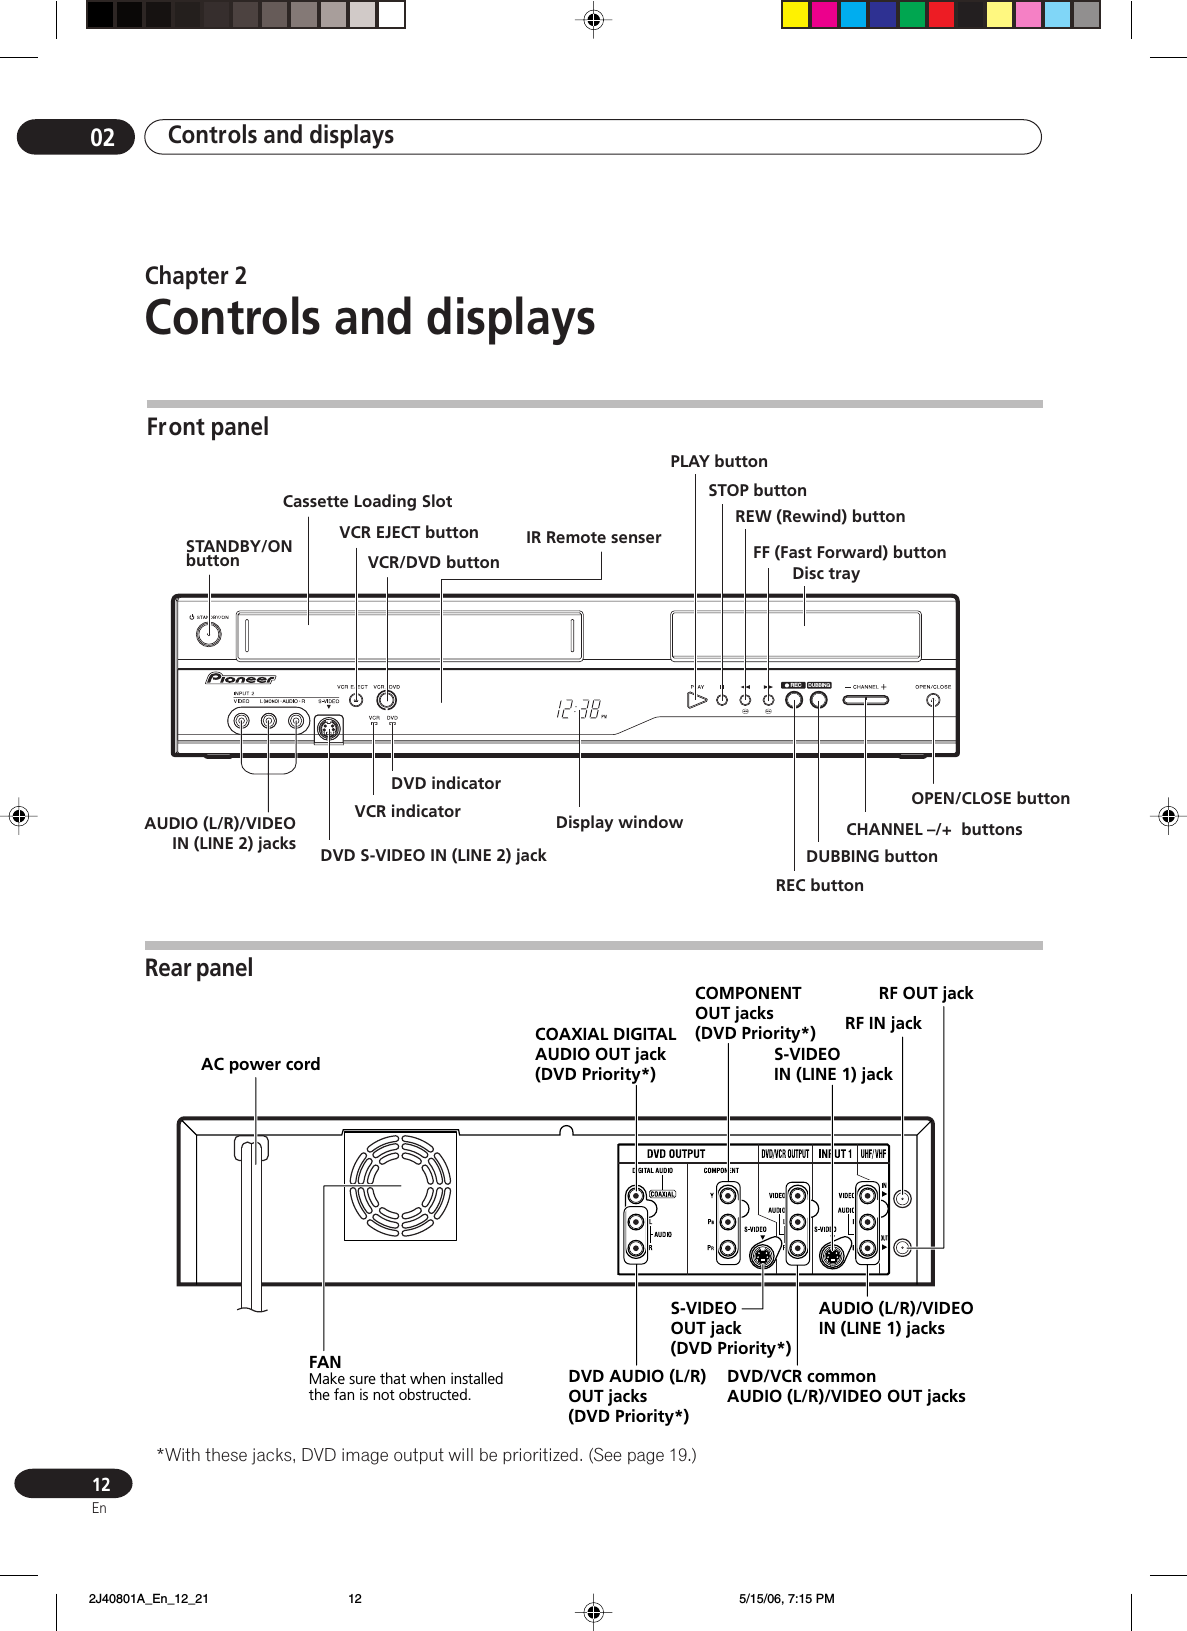 Controls and displays0212EnRECDUBBINGFF (Fast Forward) buttonREW (Rewind) buttonAUDIO (L/R)/VIDEOIN (LINE 2) jacksVCR/DVD buttonSTANDBY/ONbuttonVCR EJECT buttonDisc trayREC button PLAY buttonCassette Loading SlotIR Remote senserOPEN/CLOSE buttonDVD S-VIDEO IN (LINE 2) jackSTOP buttonDVD indicatorVCR indicatorCHANNEL –/+  buttonsDUBBING buttonDisplay windowRear panelAC power cordFANMake sure that when installed the fan is not obstructed.COAXIAL DIGITALAUDIO OUT jack(DVD Priority*)DVD/VCR commonAUDIO (L/R)/VIDEO OUT jacksDVD AUDIO (L/R)OUT jacks(DVD Priority*)AUDIO (L/R)/VIDEO IN (LINE 1) jacksS-VIDEOIN (LINE 1) jackS-VIDEOOUT jack(DVD Priority*)COMPONENTOUT jacks(DVD Priority*) RF IN jackRF OUT jackFront panelChapter 2Controls and displays*With these jacks, DVD image output will be prioritized. (See page 19.) 2J40801A_En_12_21 5/15/06, 7:15 PM12